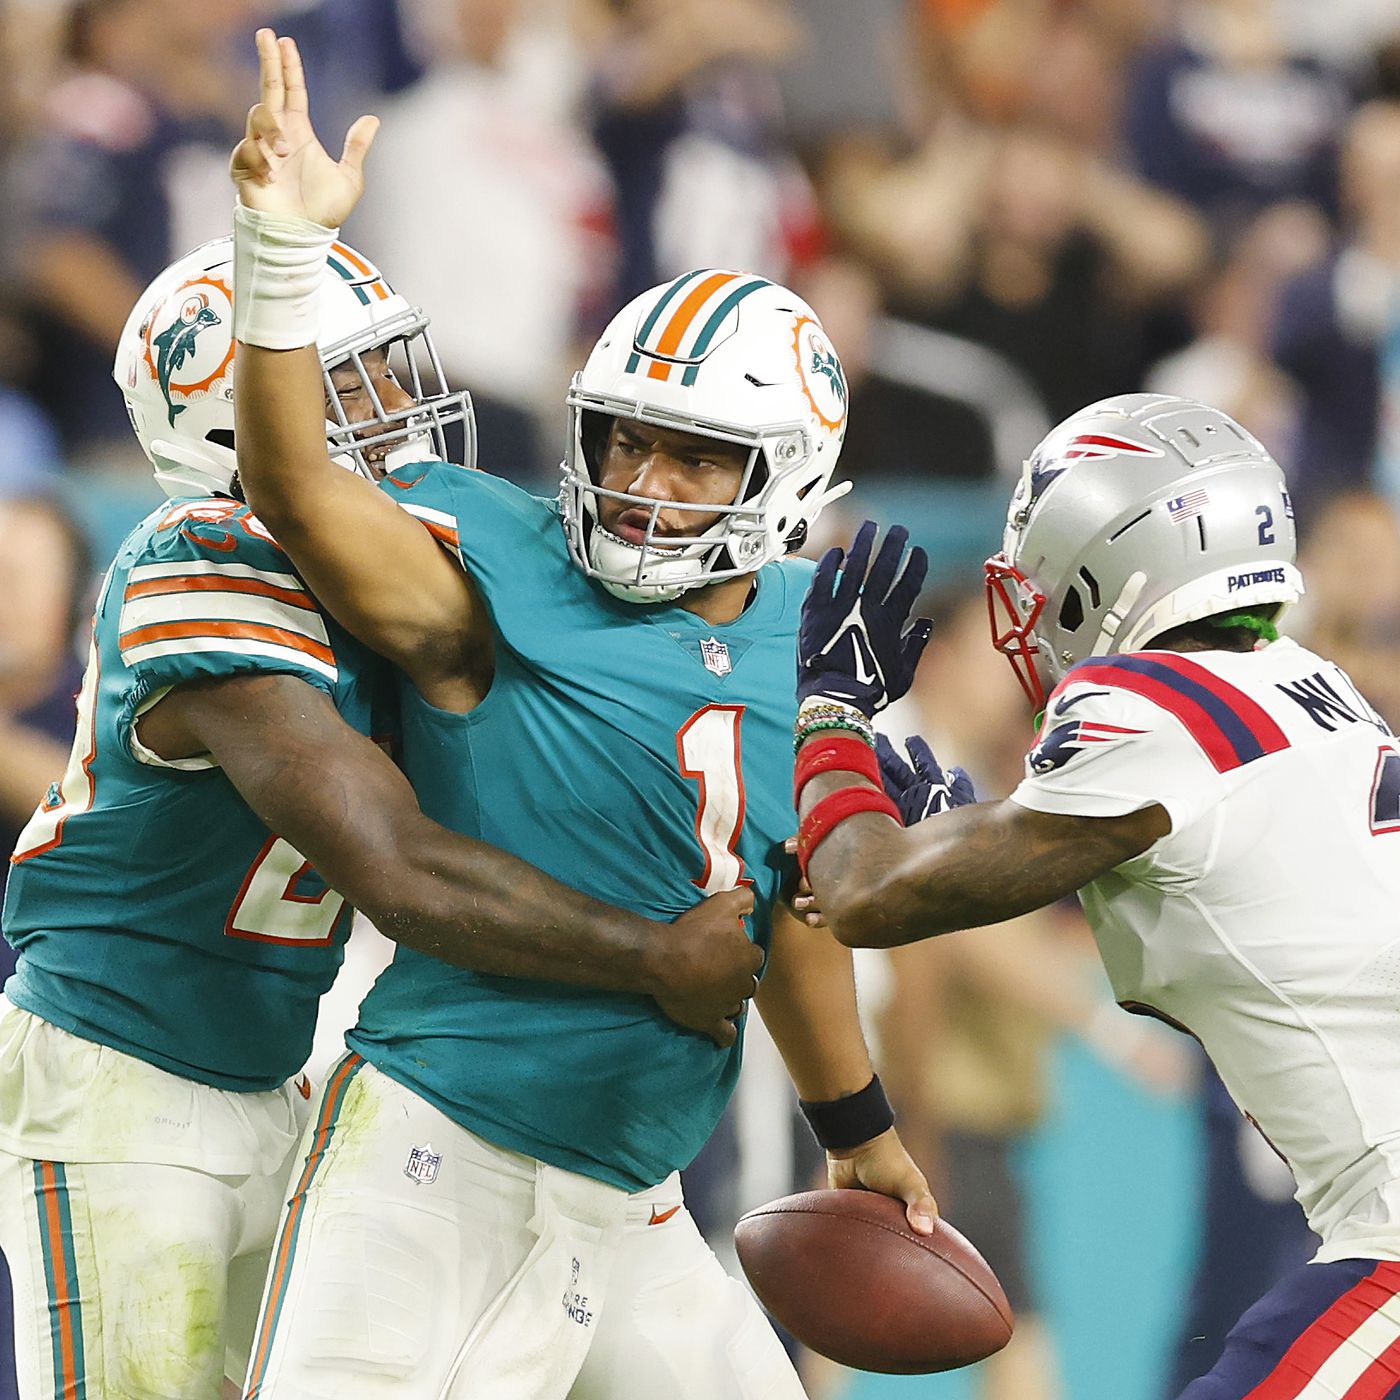 Miami Dolphins Home Schedule 2022 Dolphins 2022 Schedule: Opponents Set For Next Year - The Phinsider